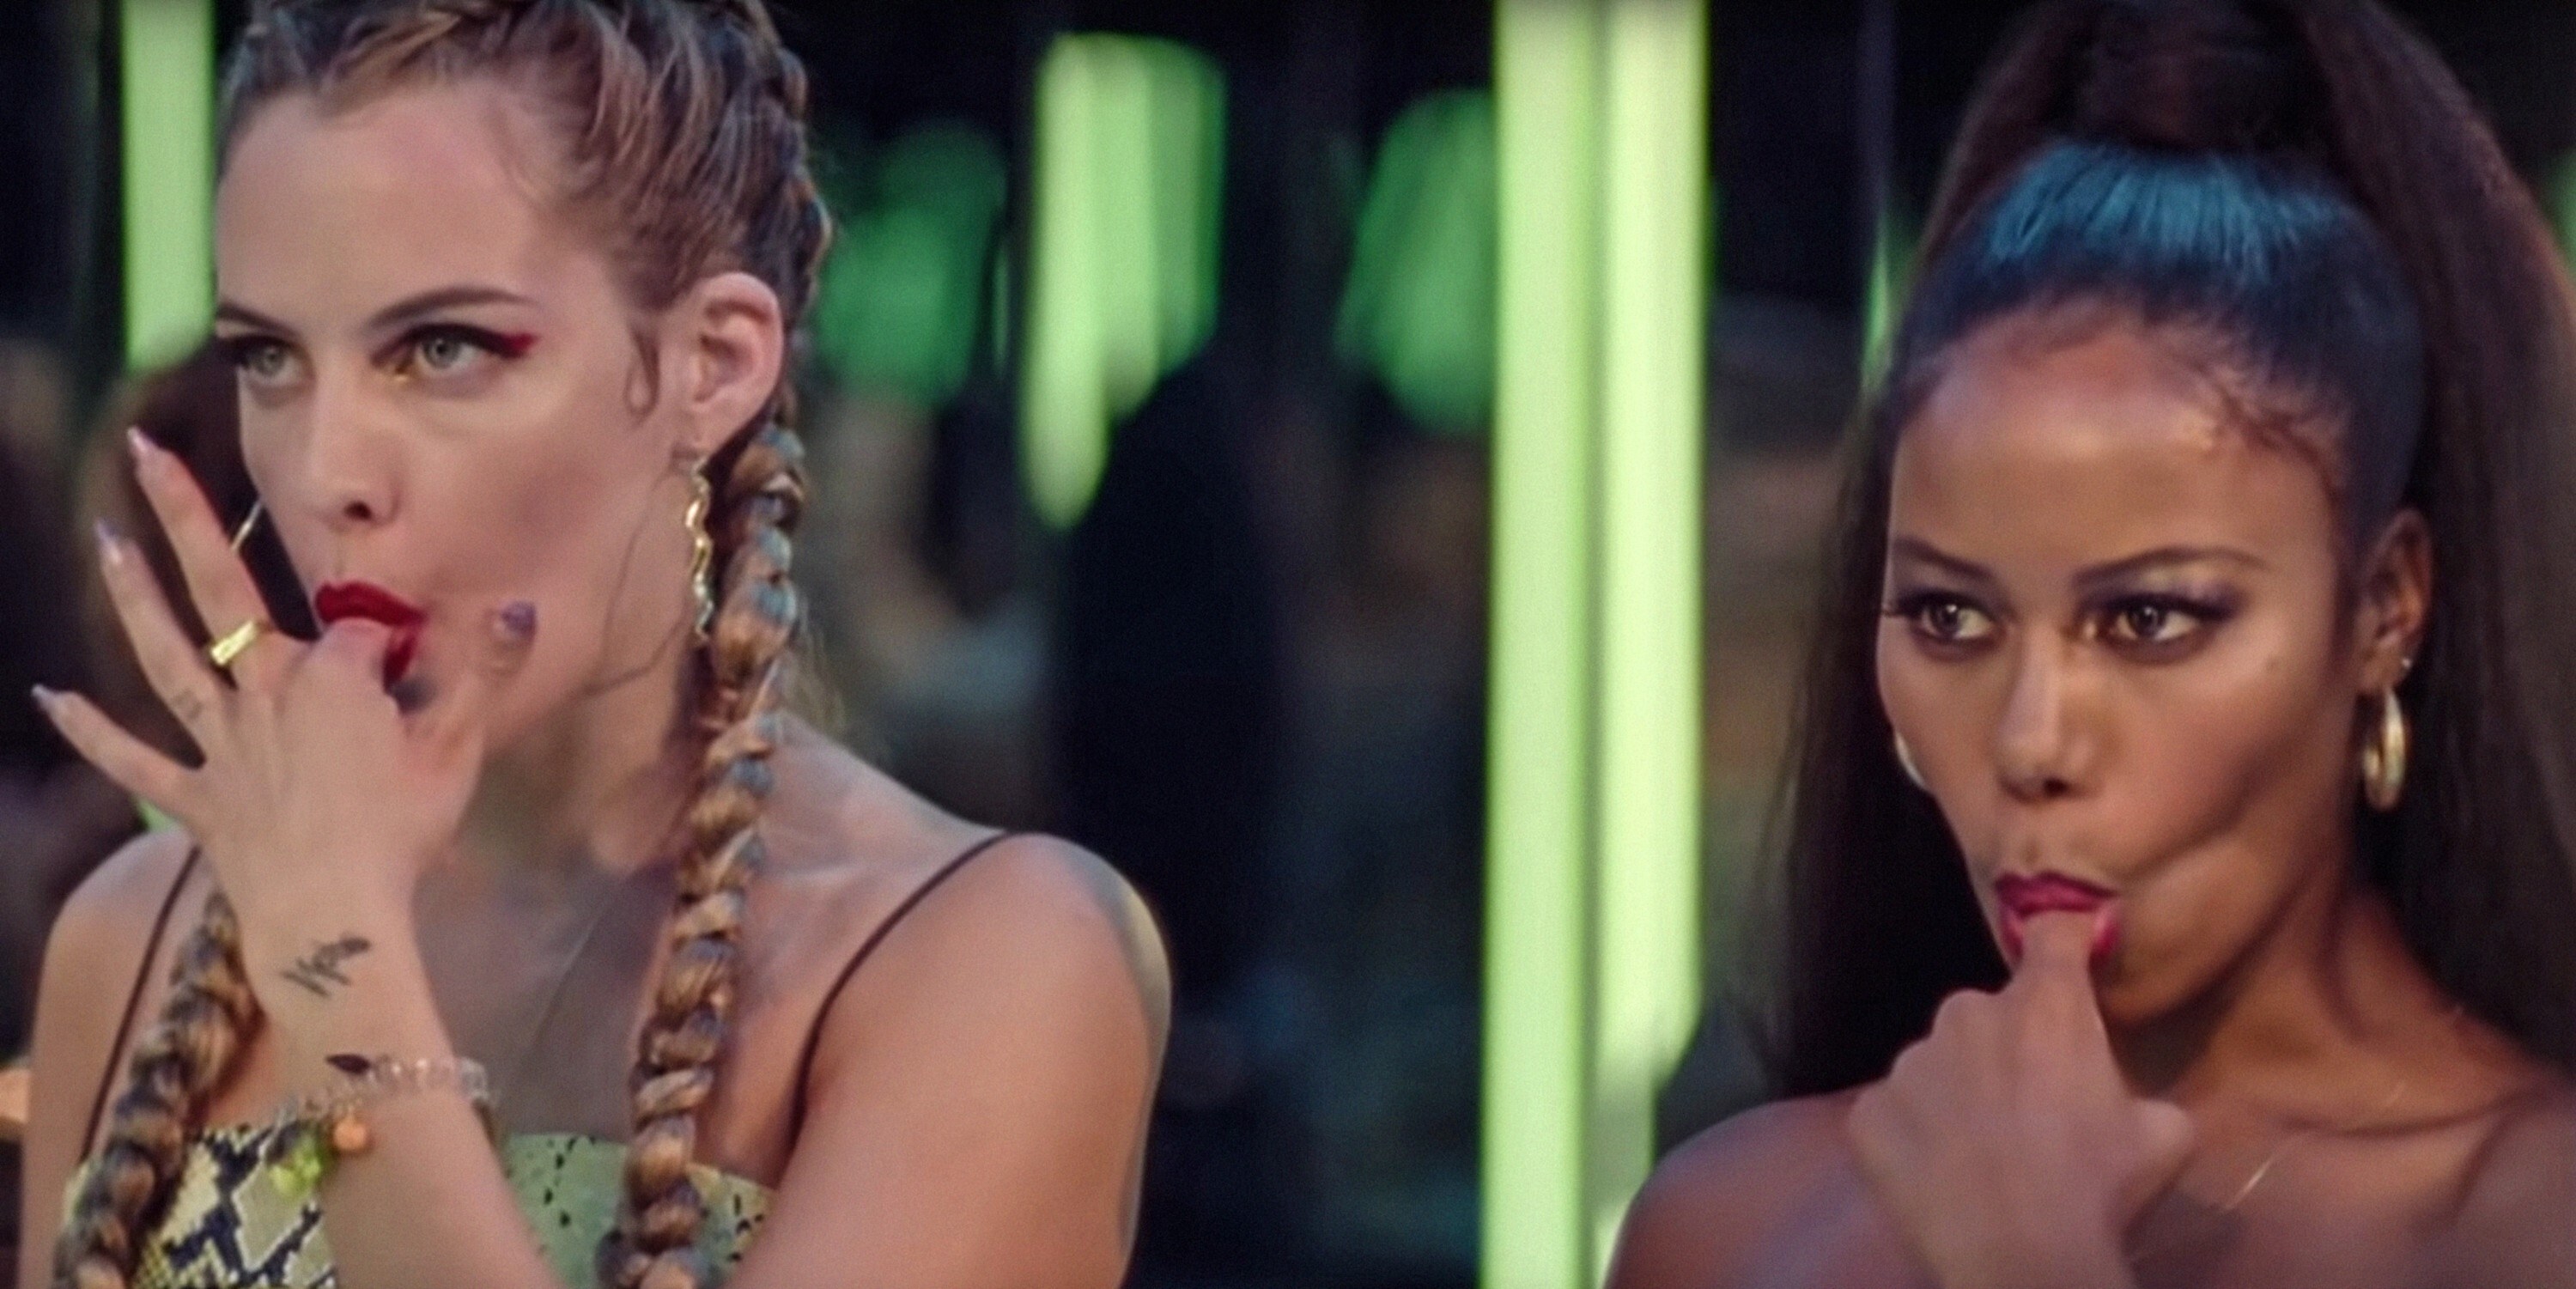 A white girl with two blonde French braids and a Black woman with a high ponytail stand behind bright green lights. They both have their own pointer finger in their mouth